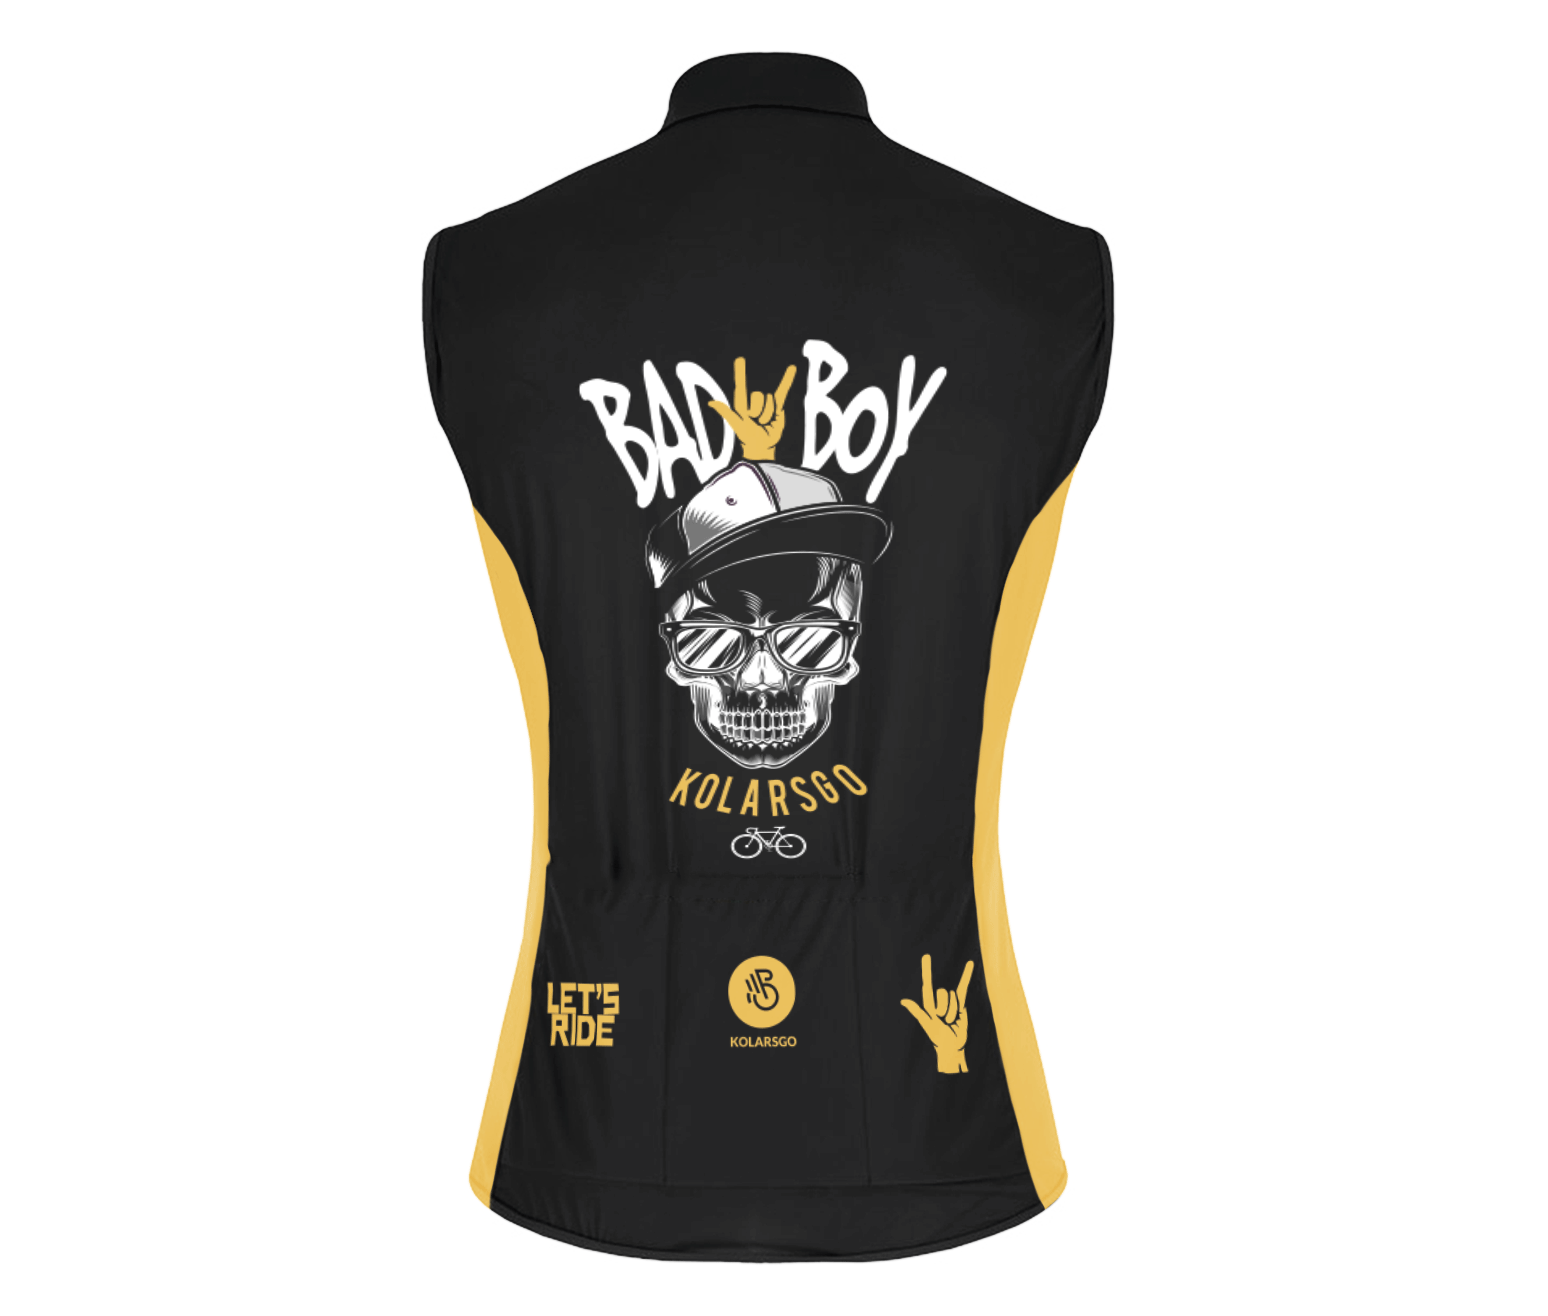 Cycling jersey without sleeves bad boy image 2